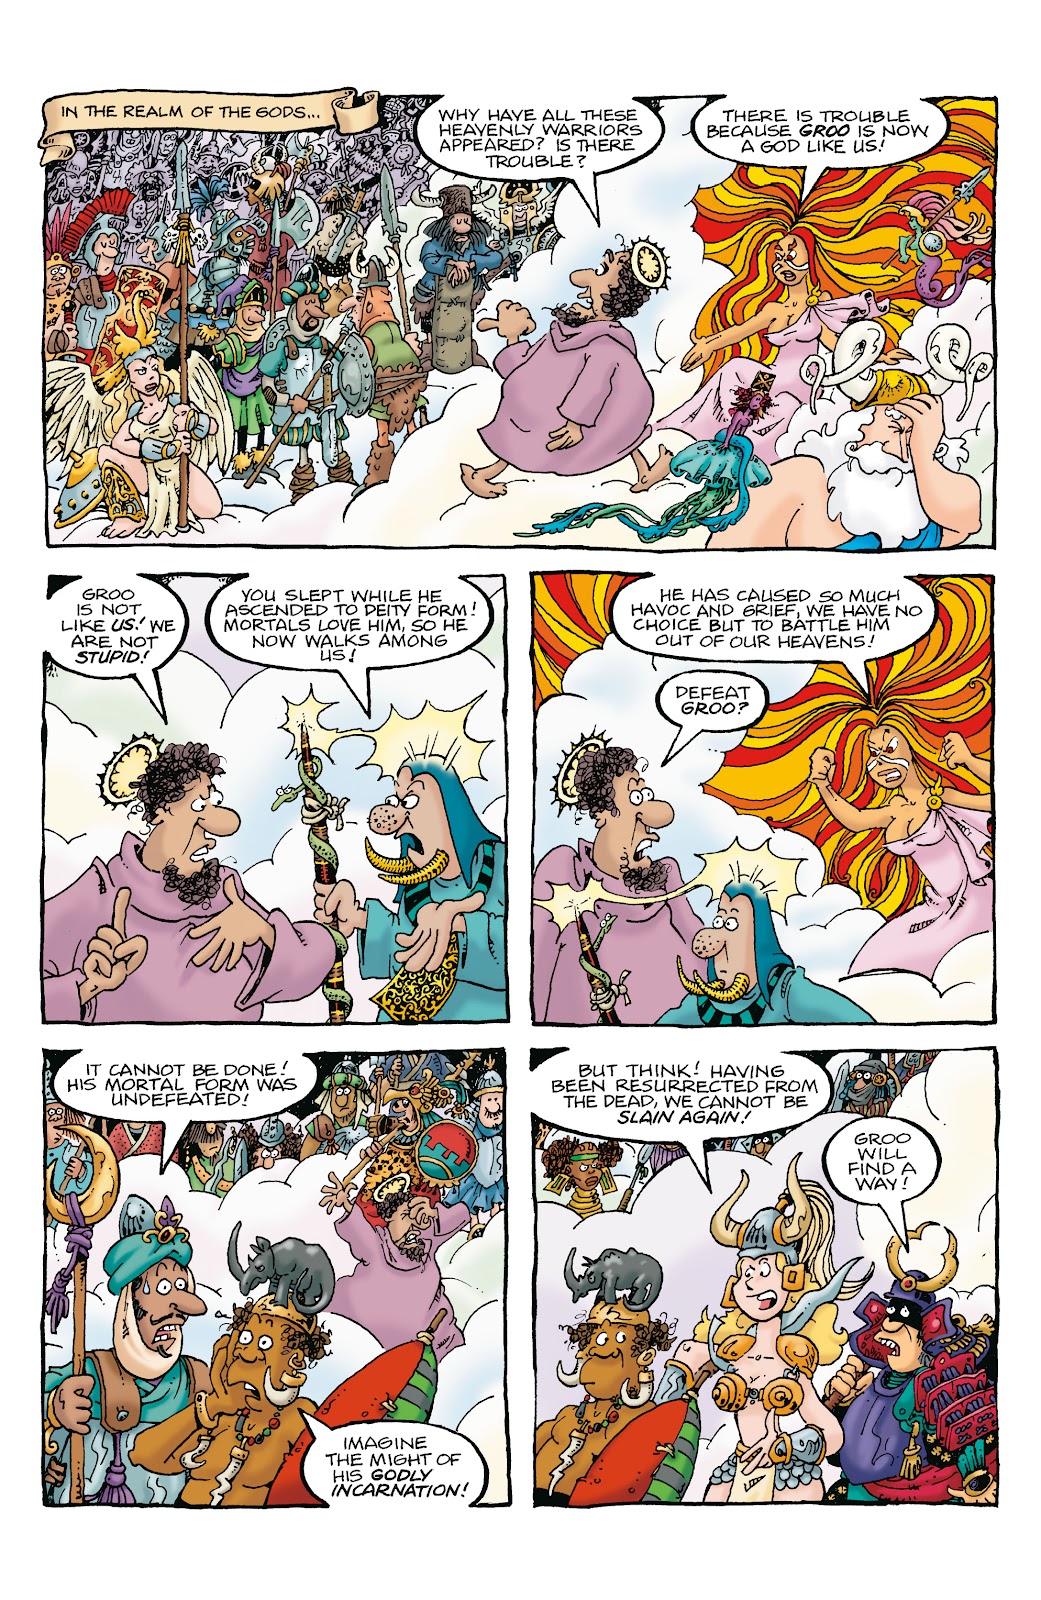 Groo: Gods Against Groo issue 2 - Page 3